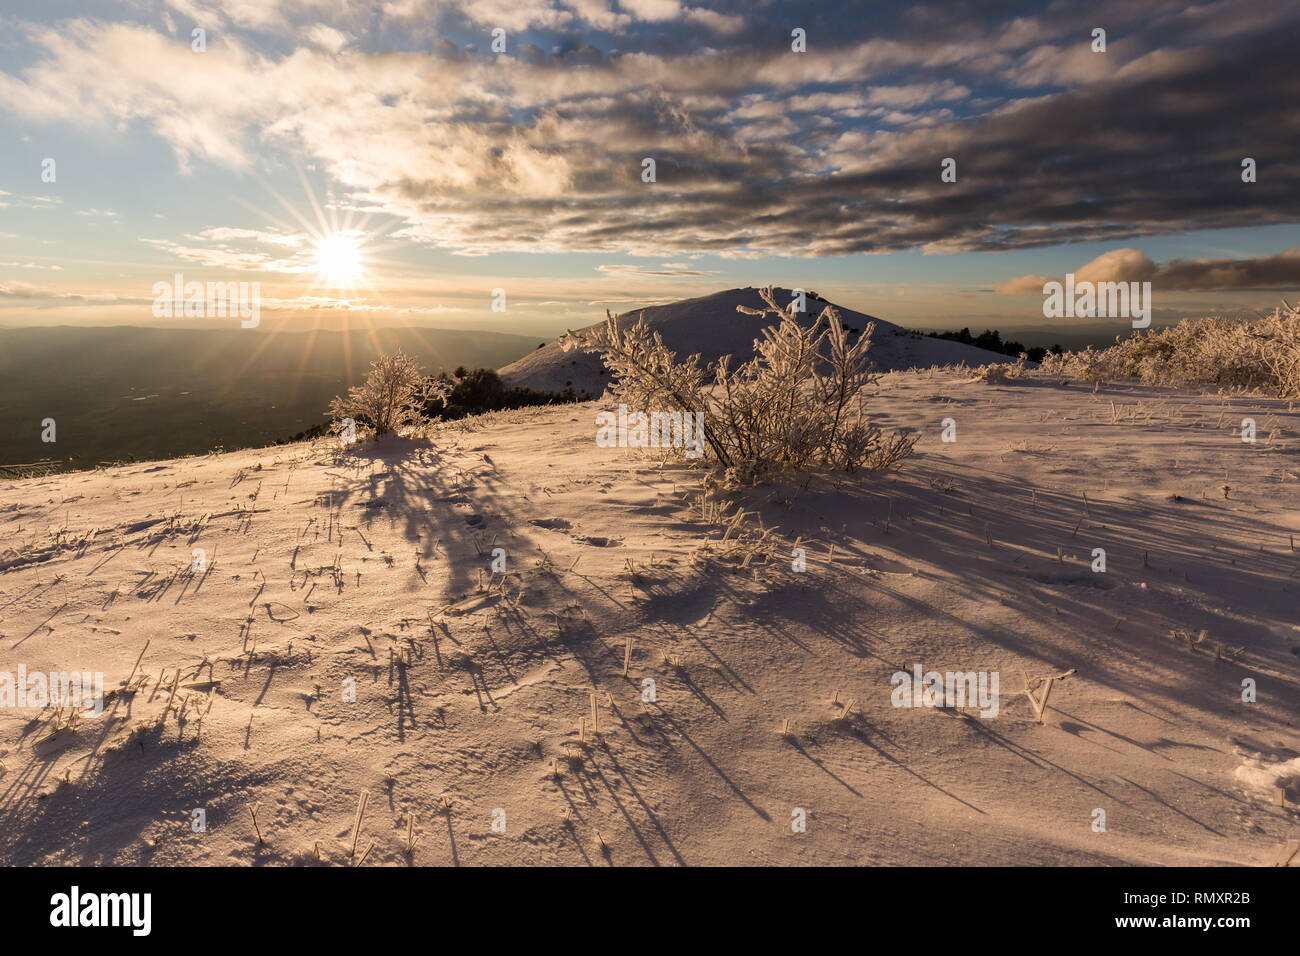 Subasio mountain (Umbria, Italy) in winter, covered by snow, with plants at golden hour Stock Photo